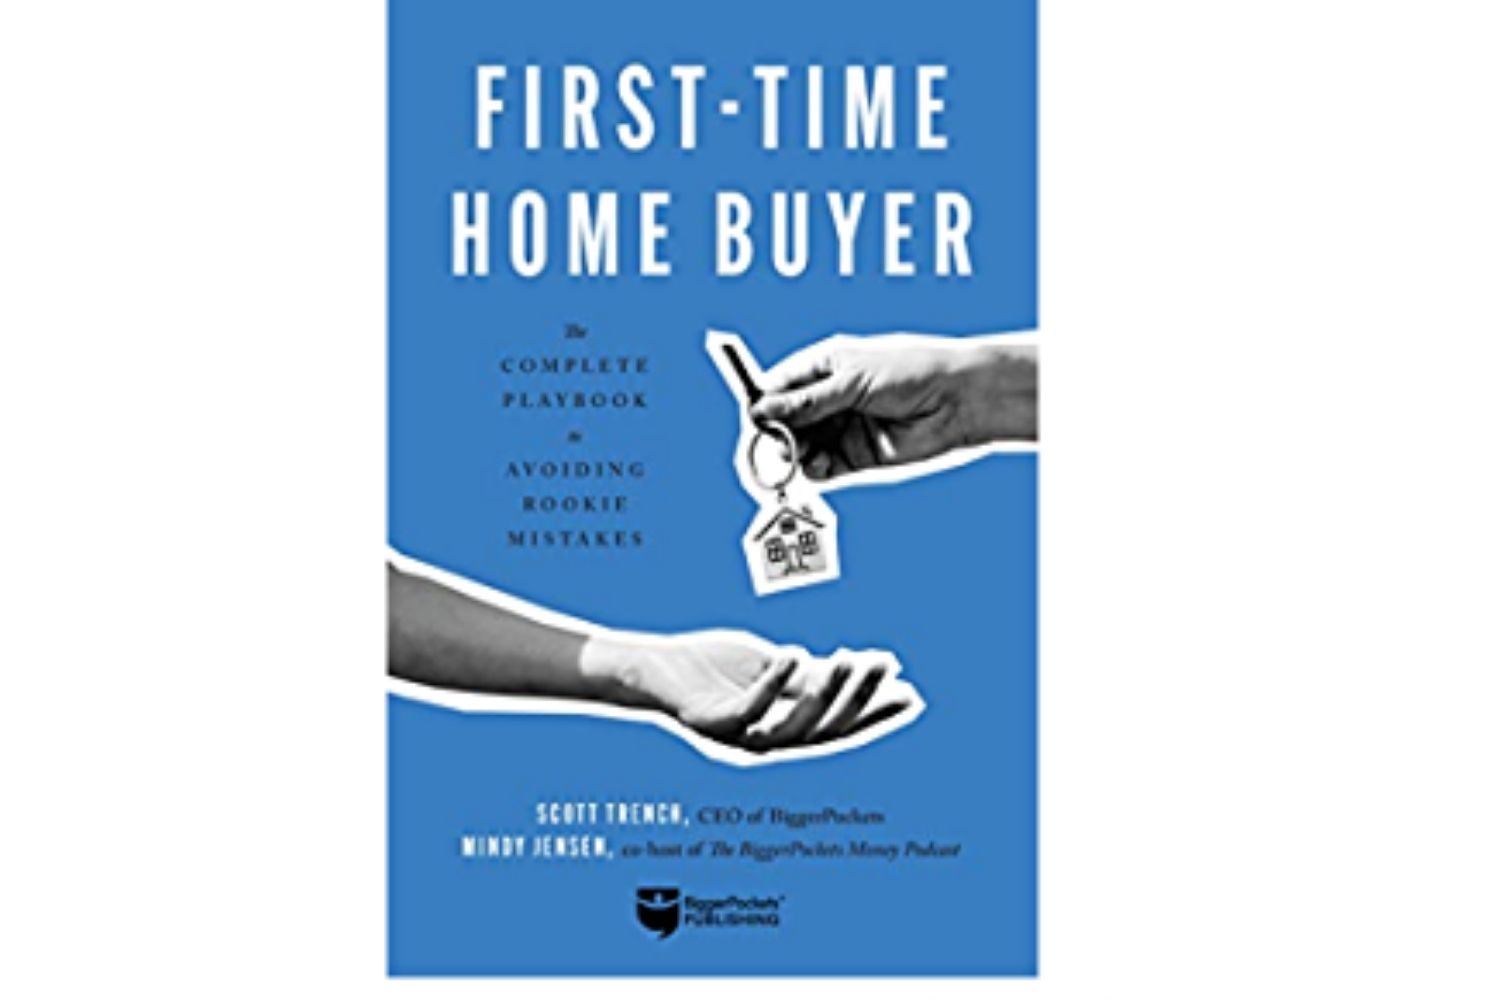 The Best Real Estate Books Options: First-Time Home Buyer